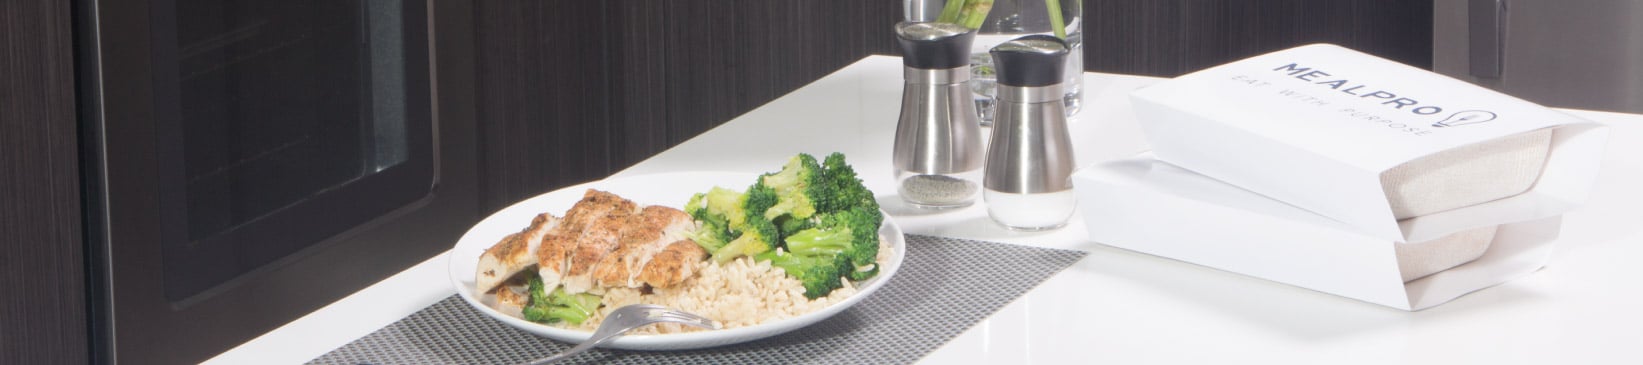 Heatlhy MealPro meals plated on the table